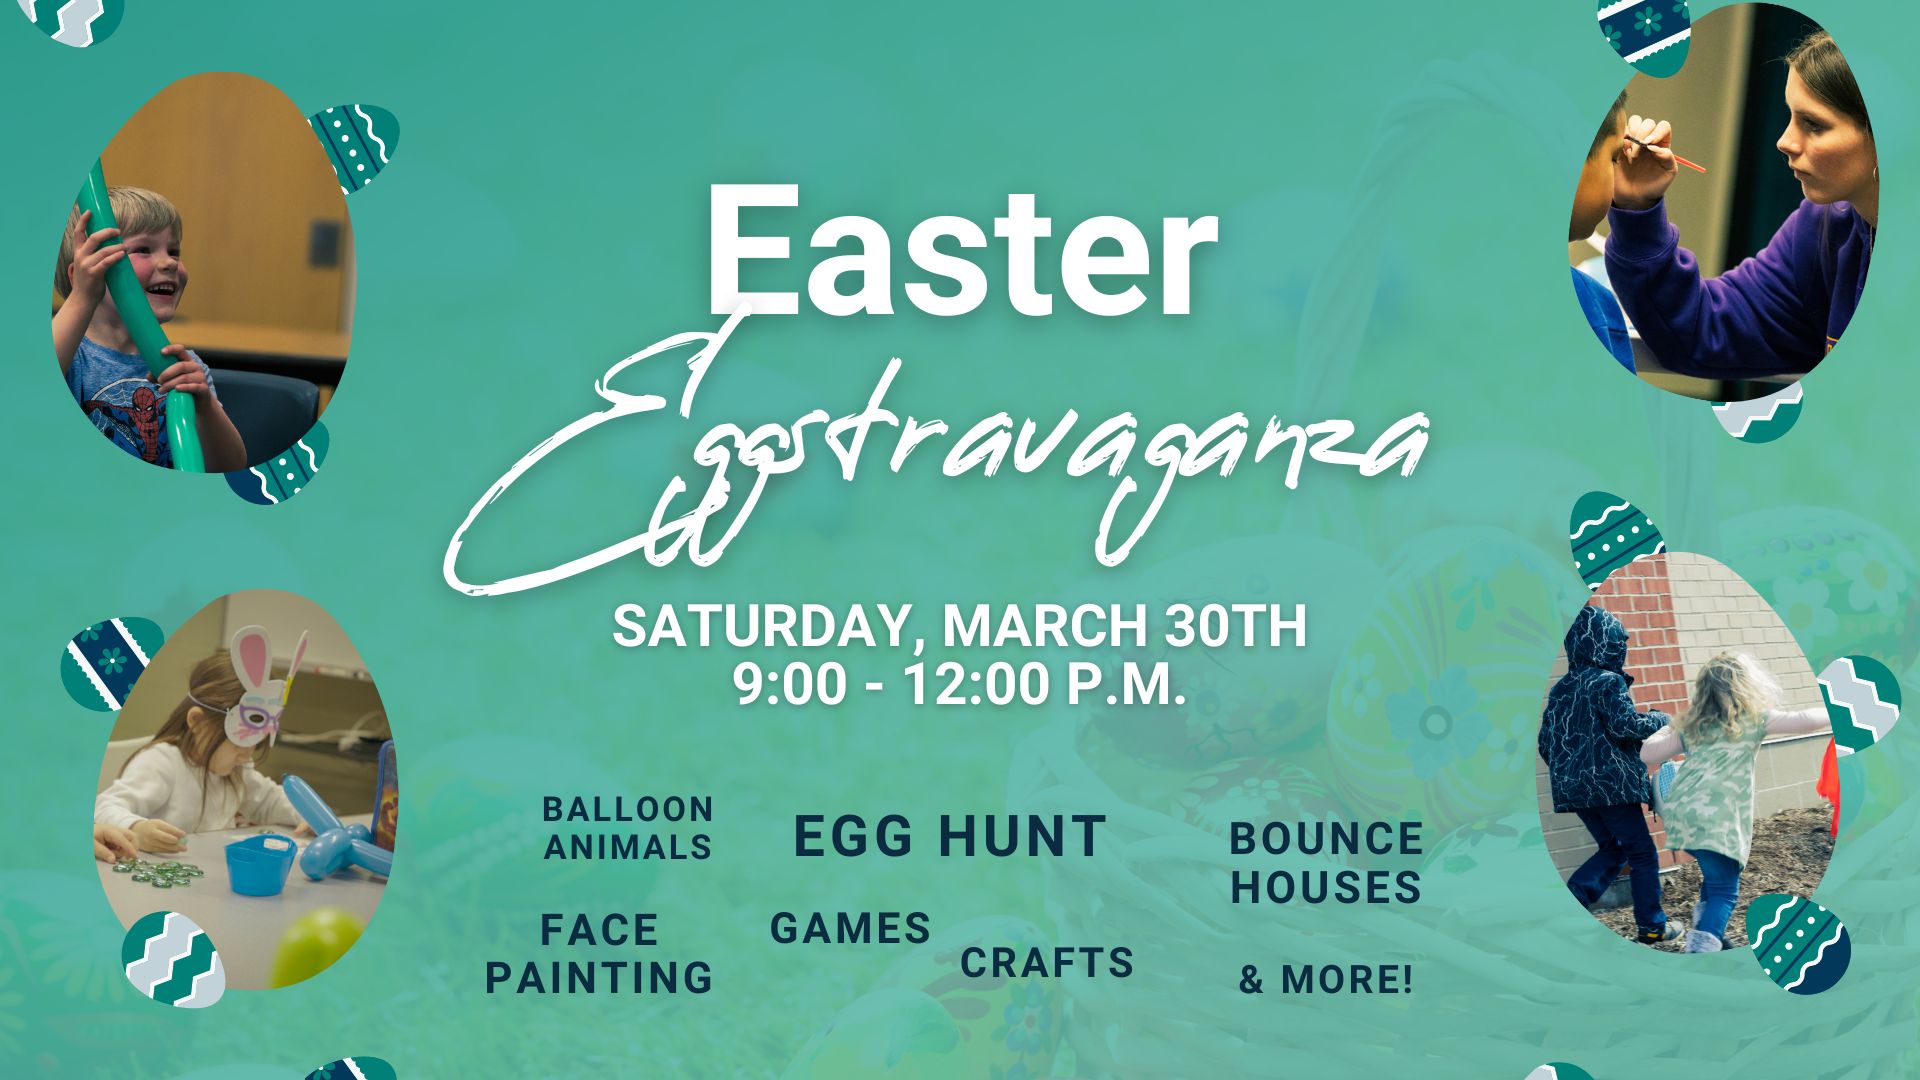 Easter extravaganza event flyer featuring activities like egg hunt, face painting, and bounce houses, scheduled for saturday, march 30th from 9 am to 12 pm.